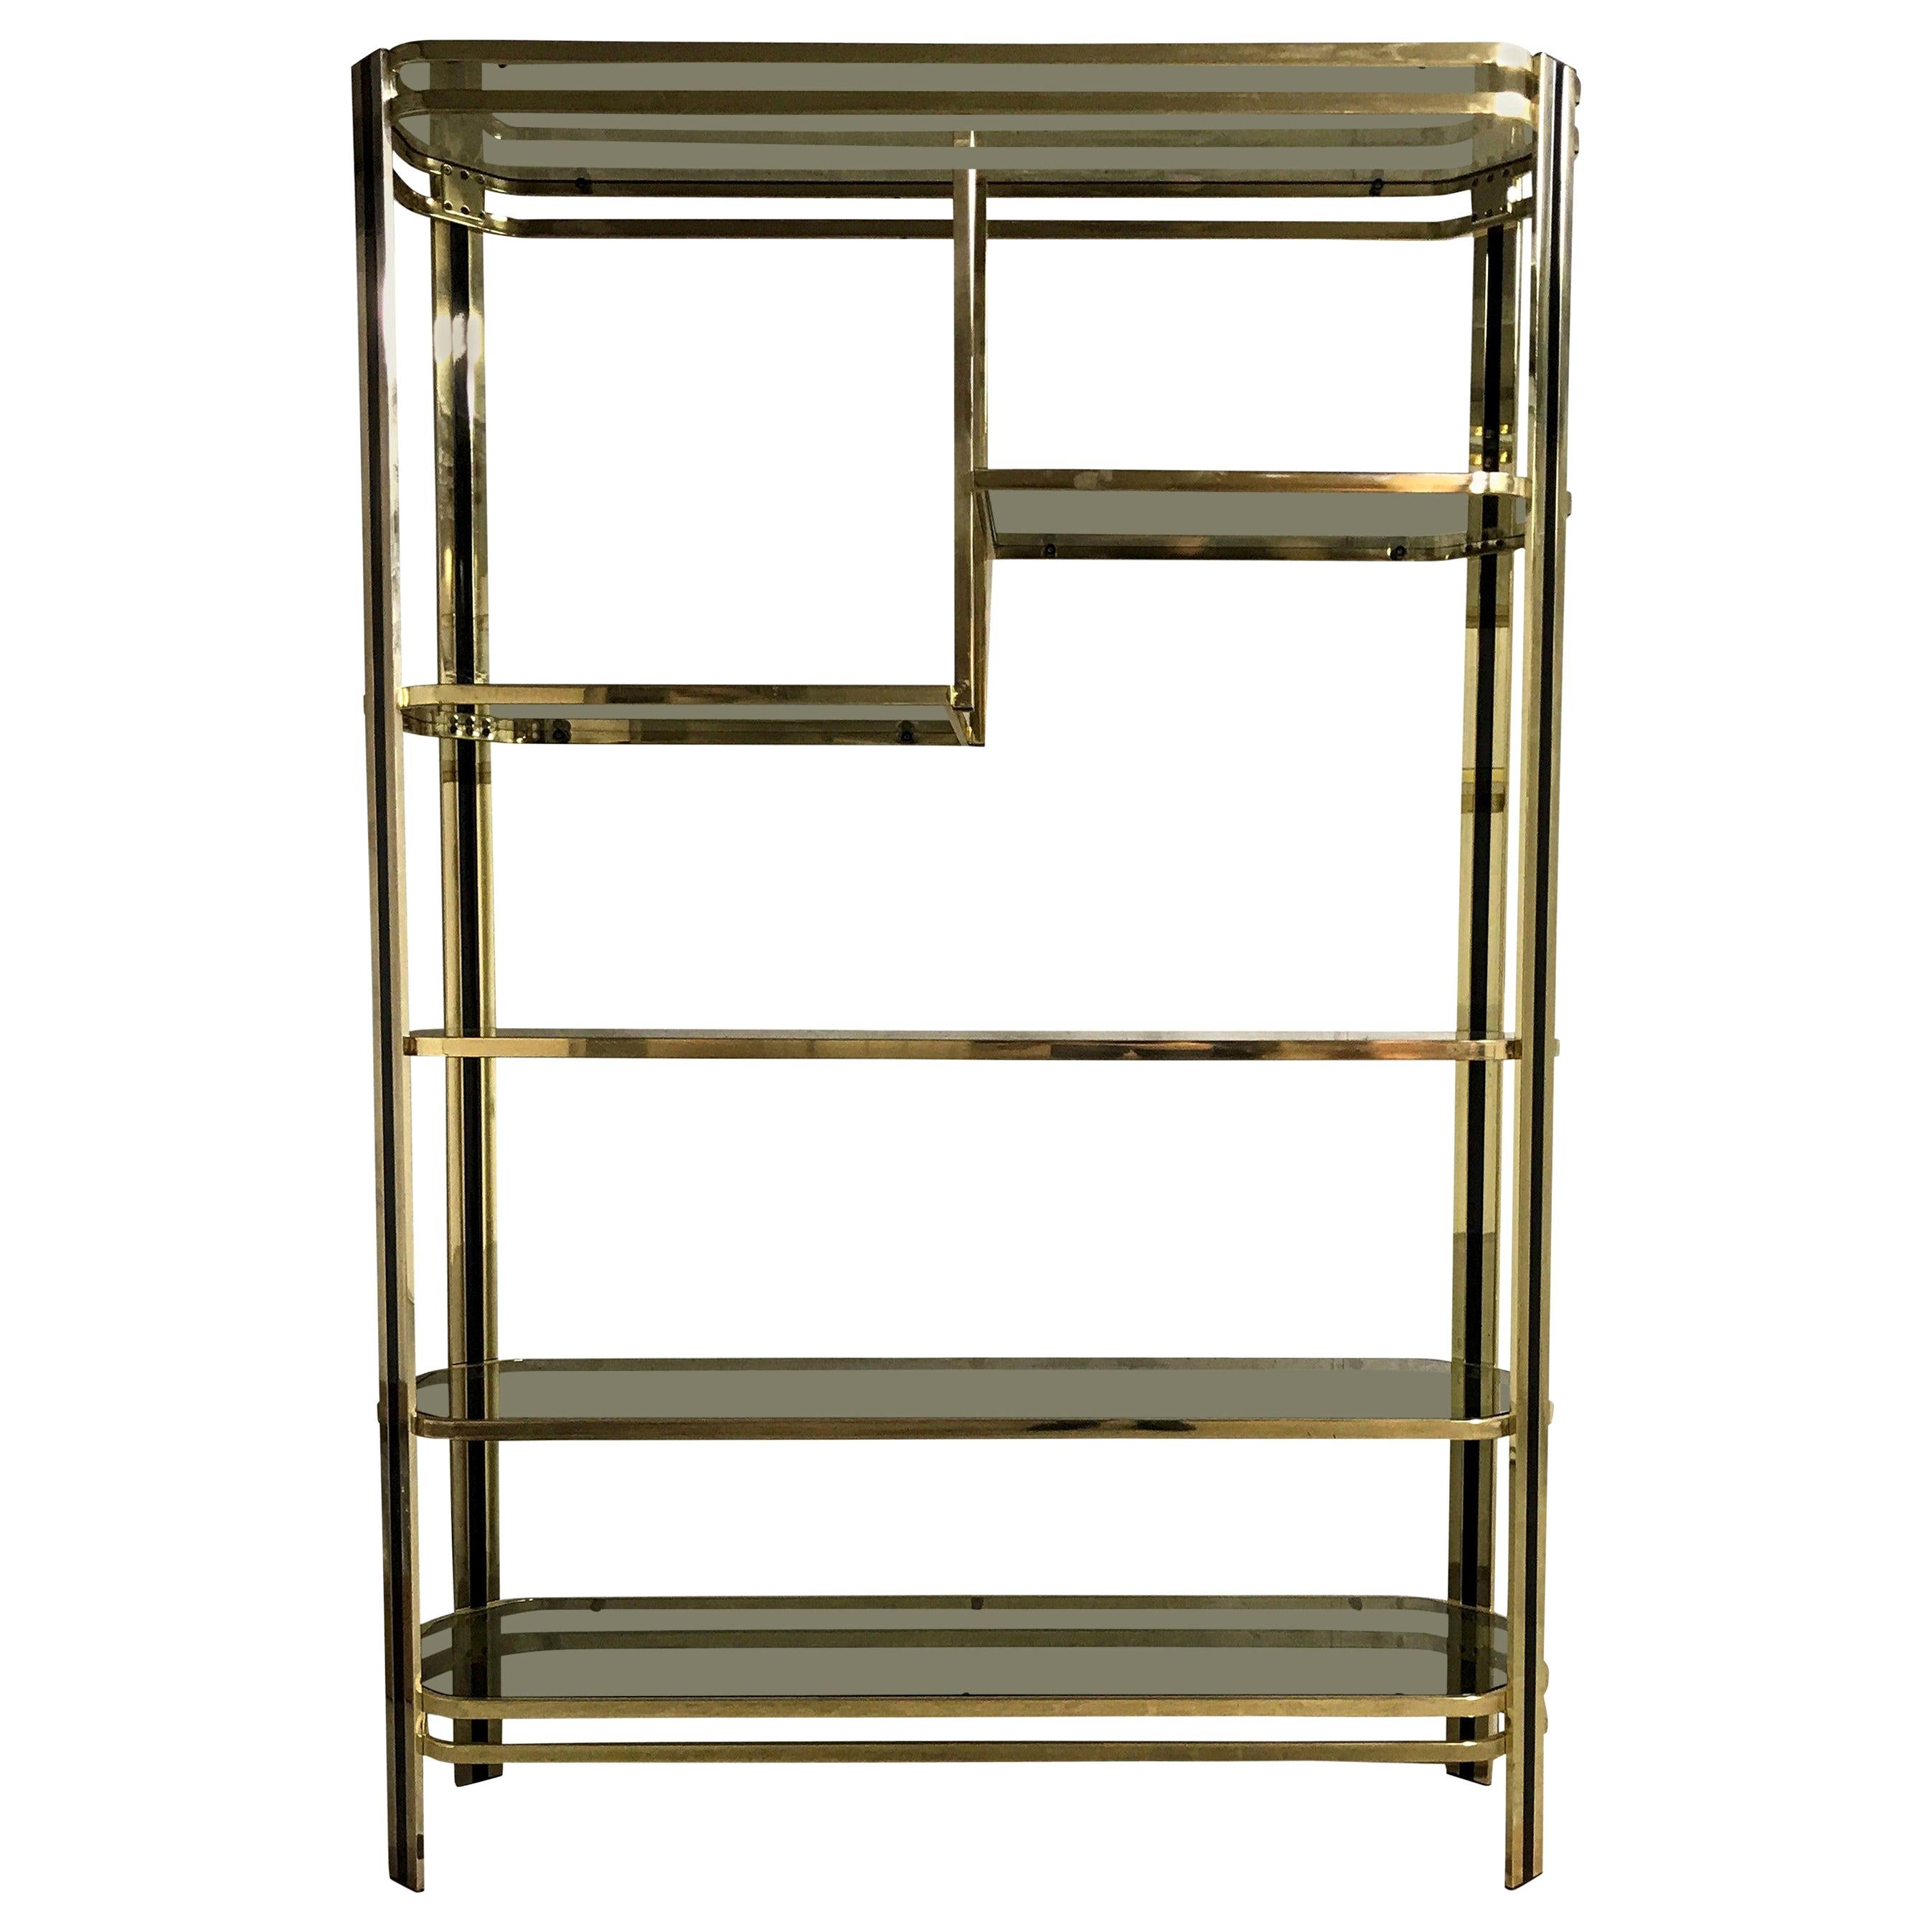 Vintage Brass and Smoked Glass Shelving Unit, 1970s